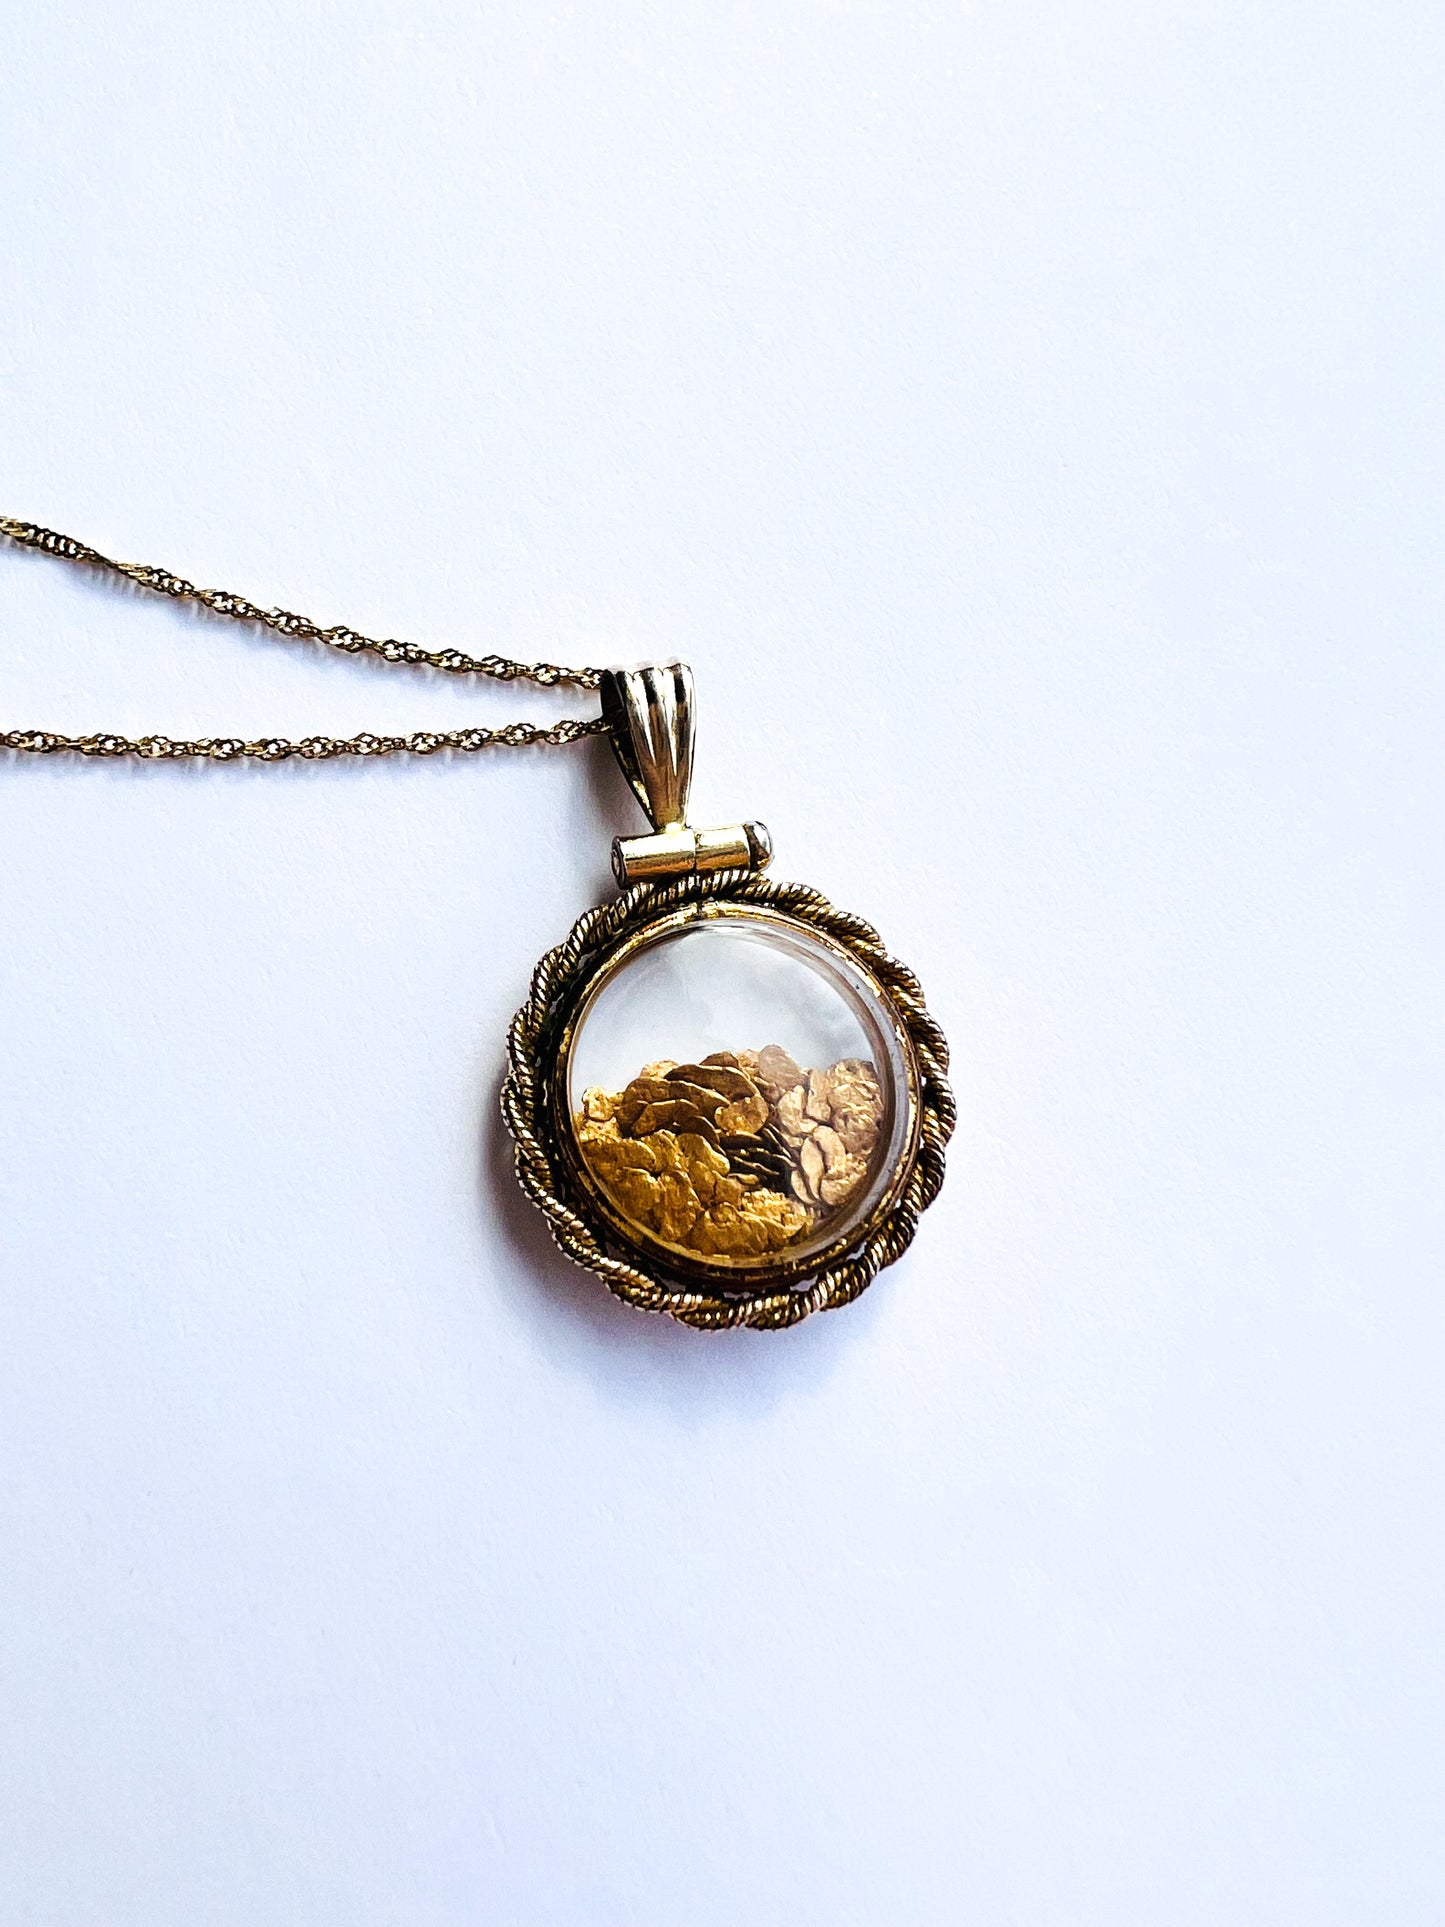 Genuine Panned Gold Flake Pendant